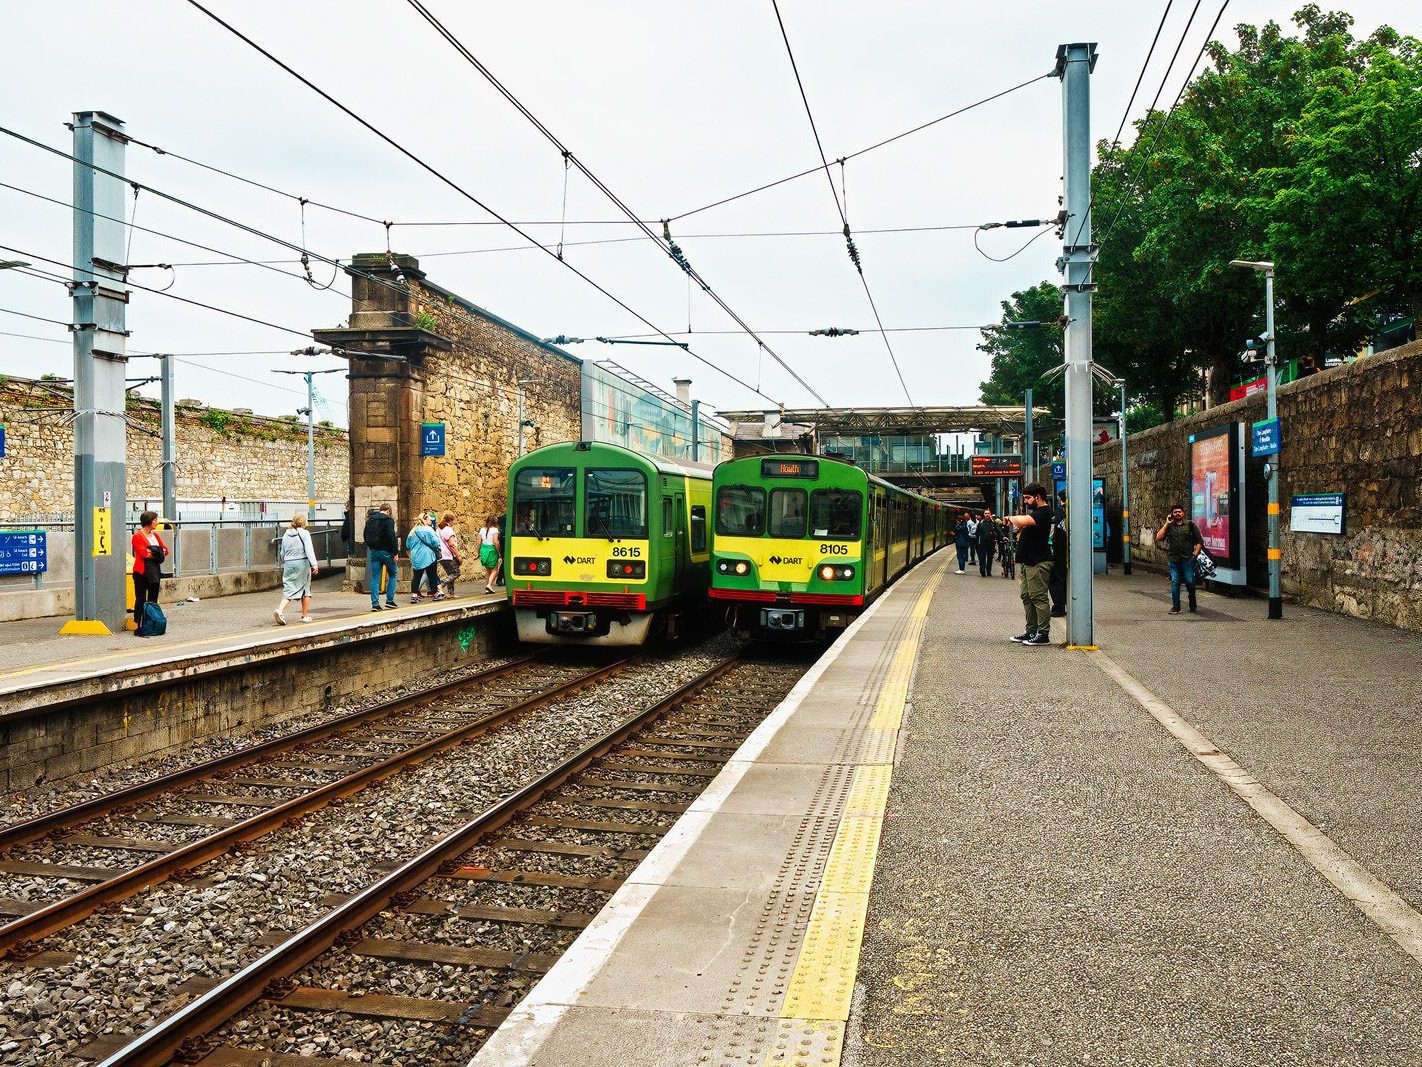 DID YOU KNOW THAT IT IS MALLIN STATION [THE TRAIN STATION IN DUN LAOGHAIRE] 007